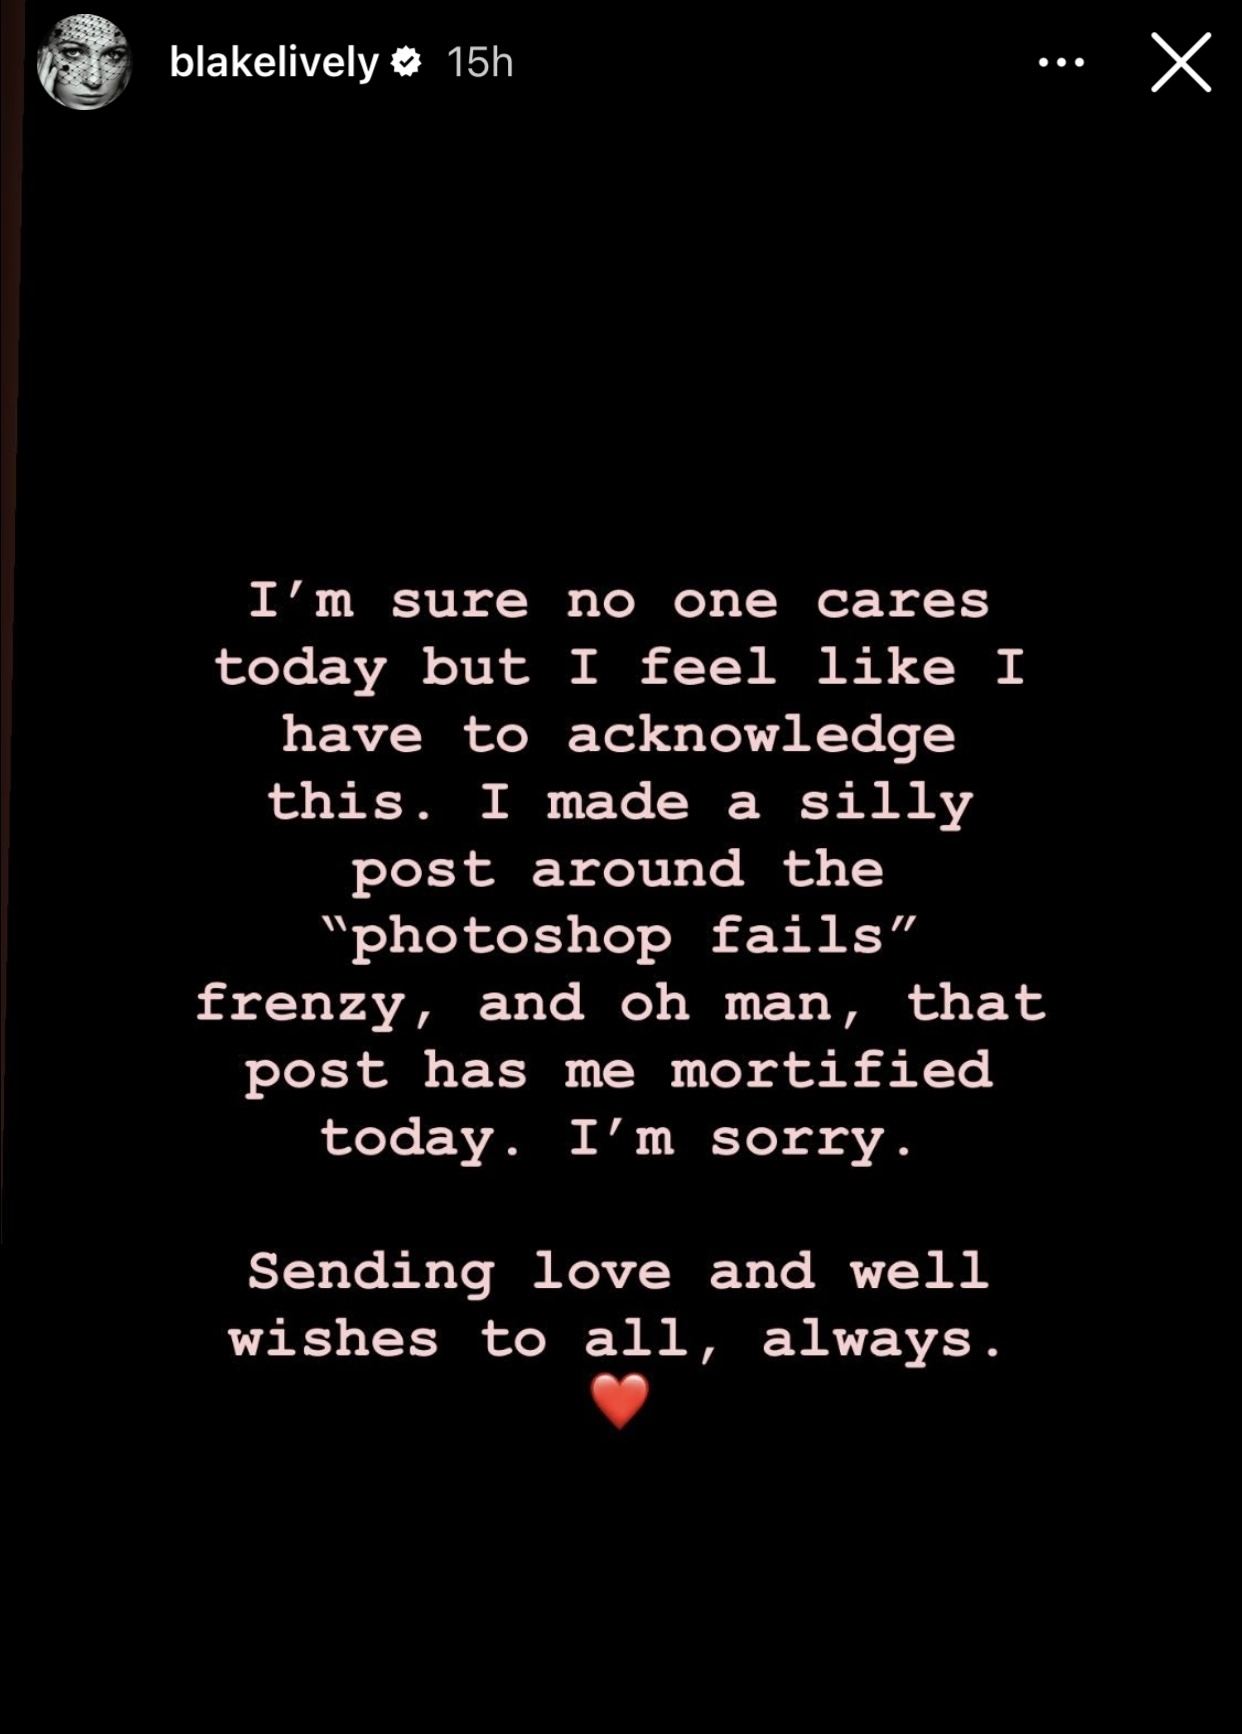 Text from an Instagram story apologizing for a social media mistake and sending love